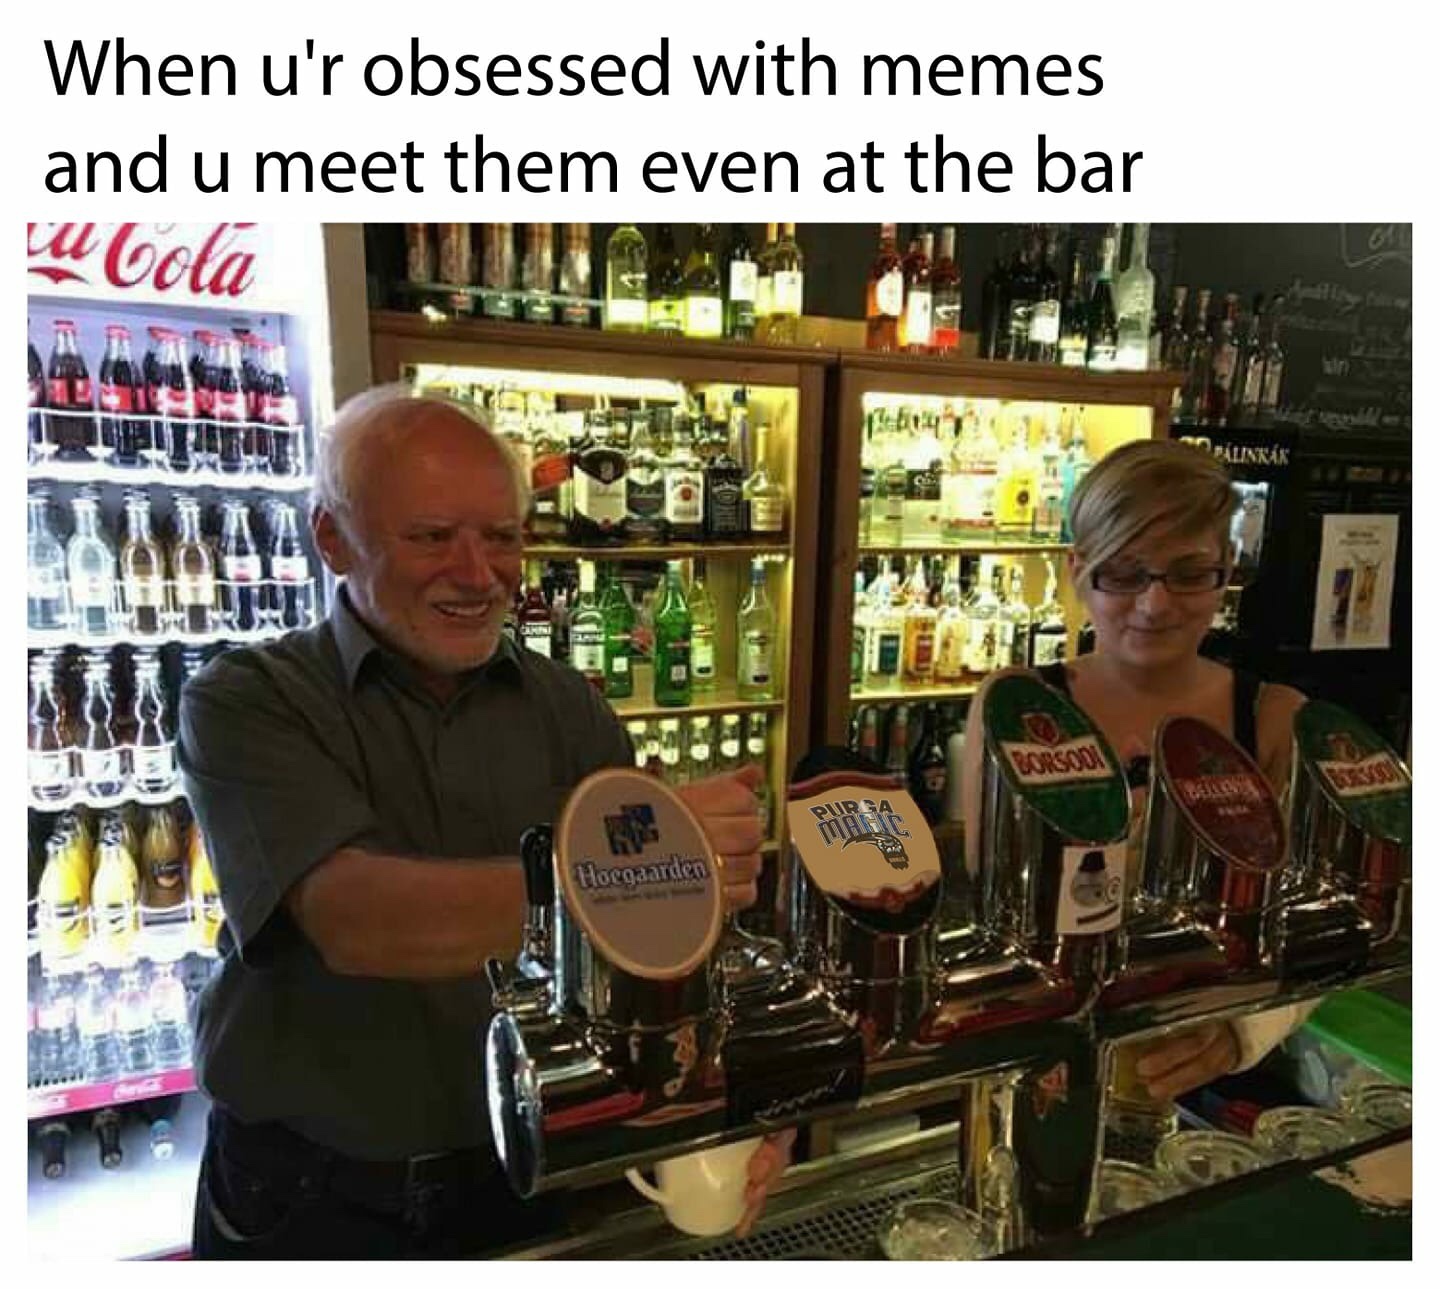 memes - When u'r obsessed with memes and u meet them even at the bar w Cola 147 Plinkk D Hoegaarden